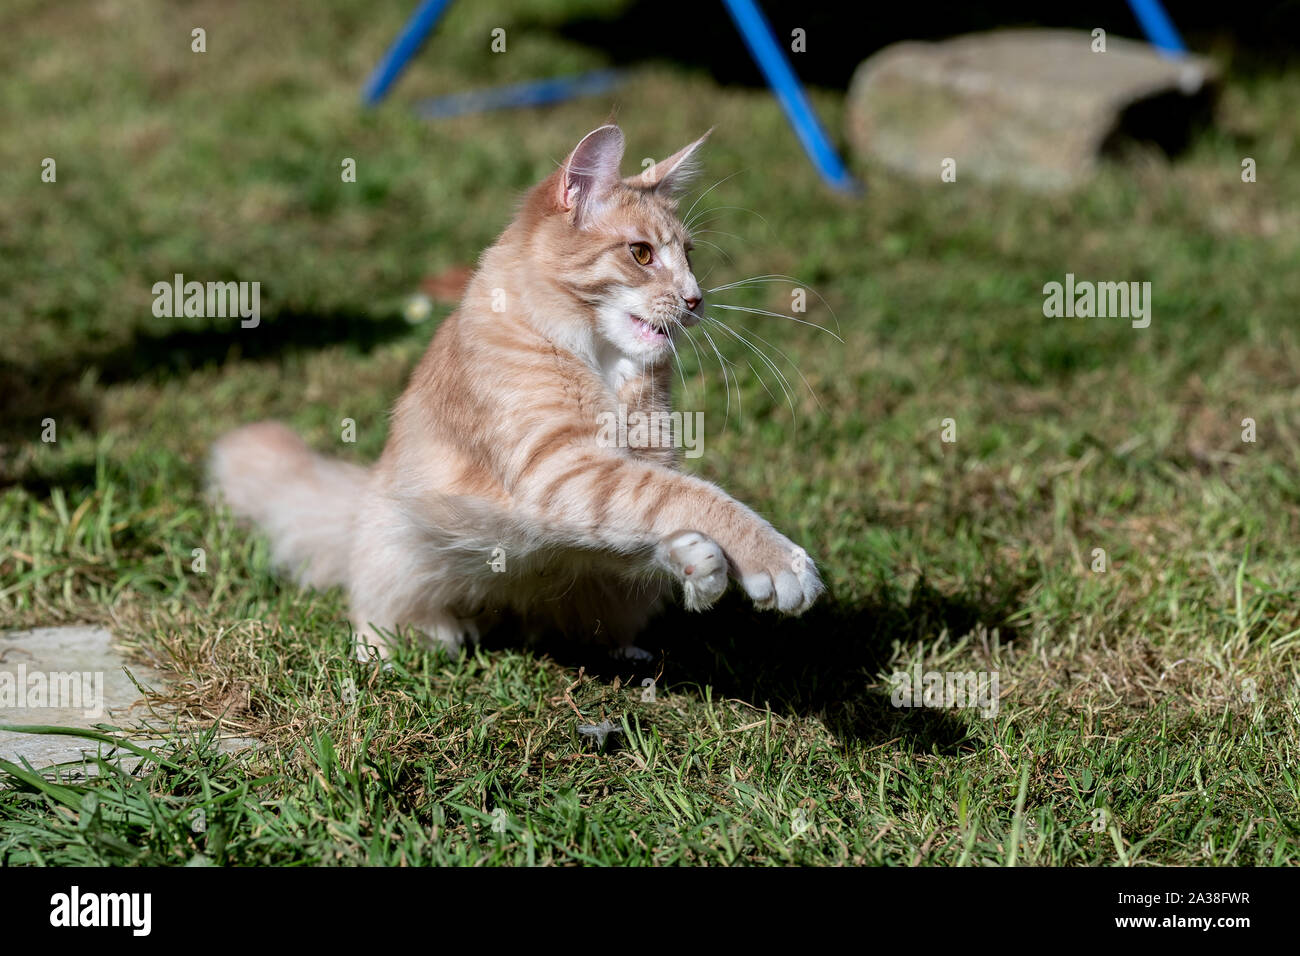 Maine Coon cat jumping in the garden Stock Photo